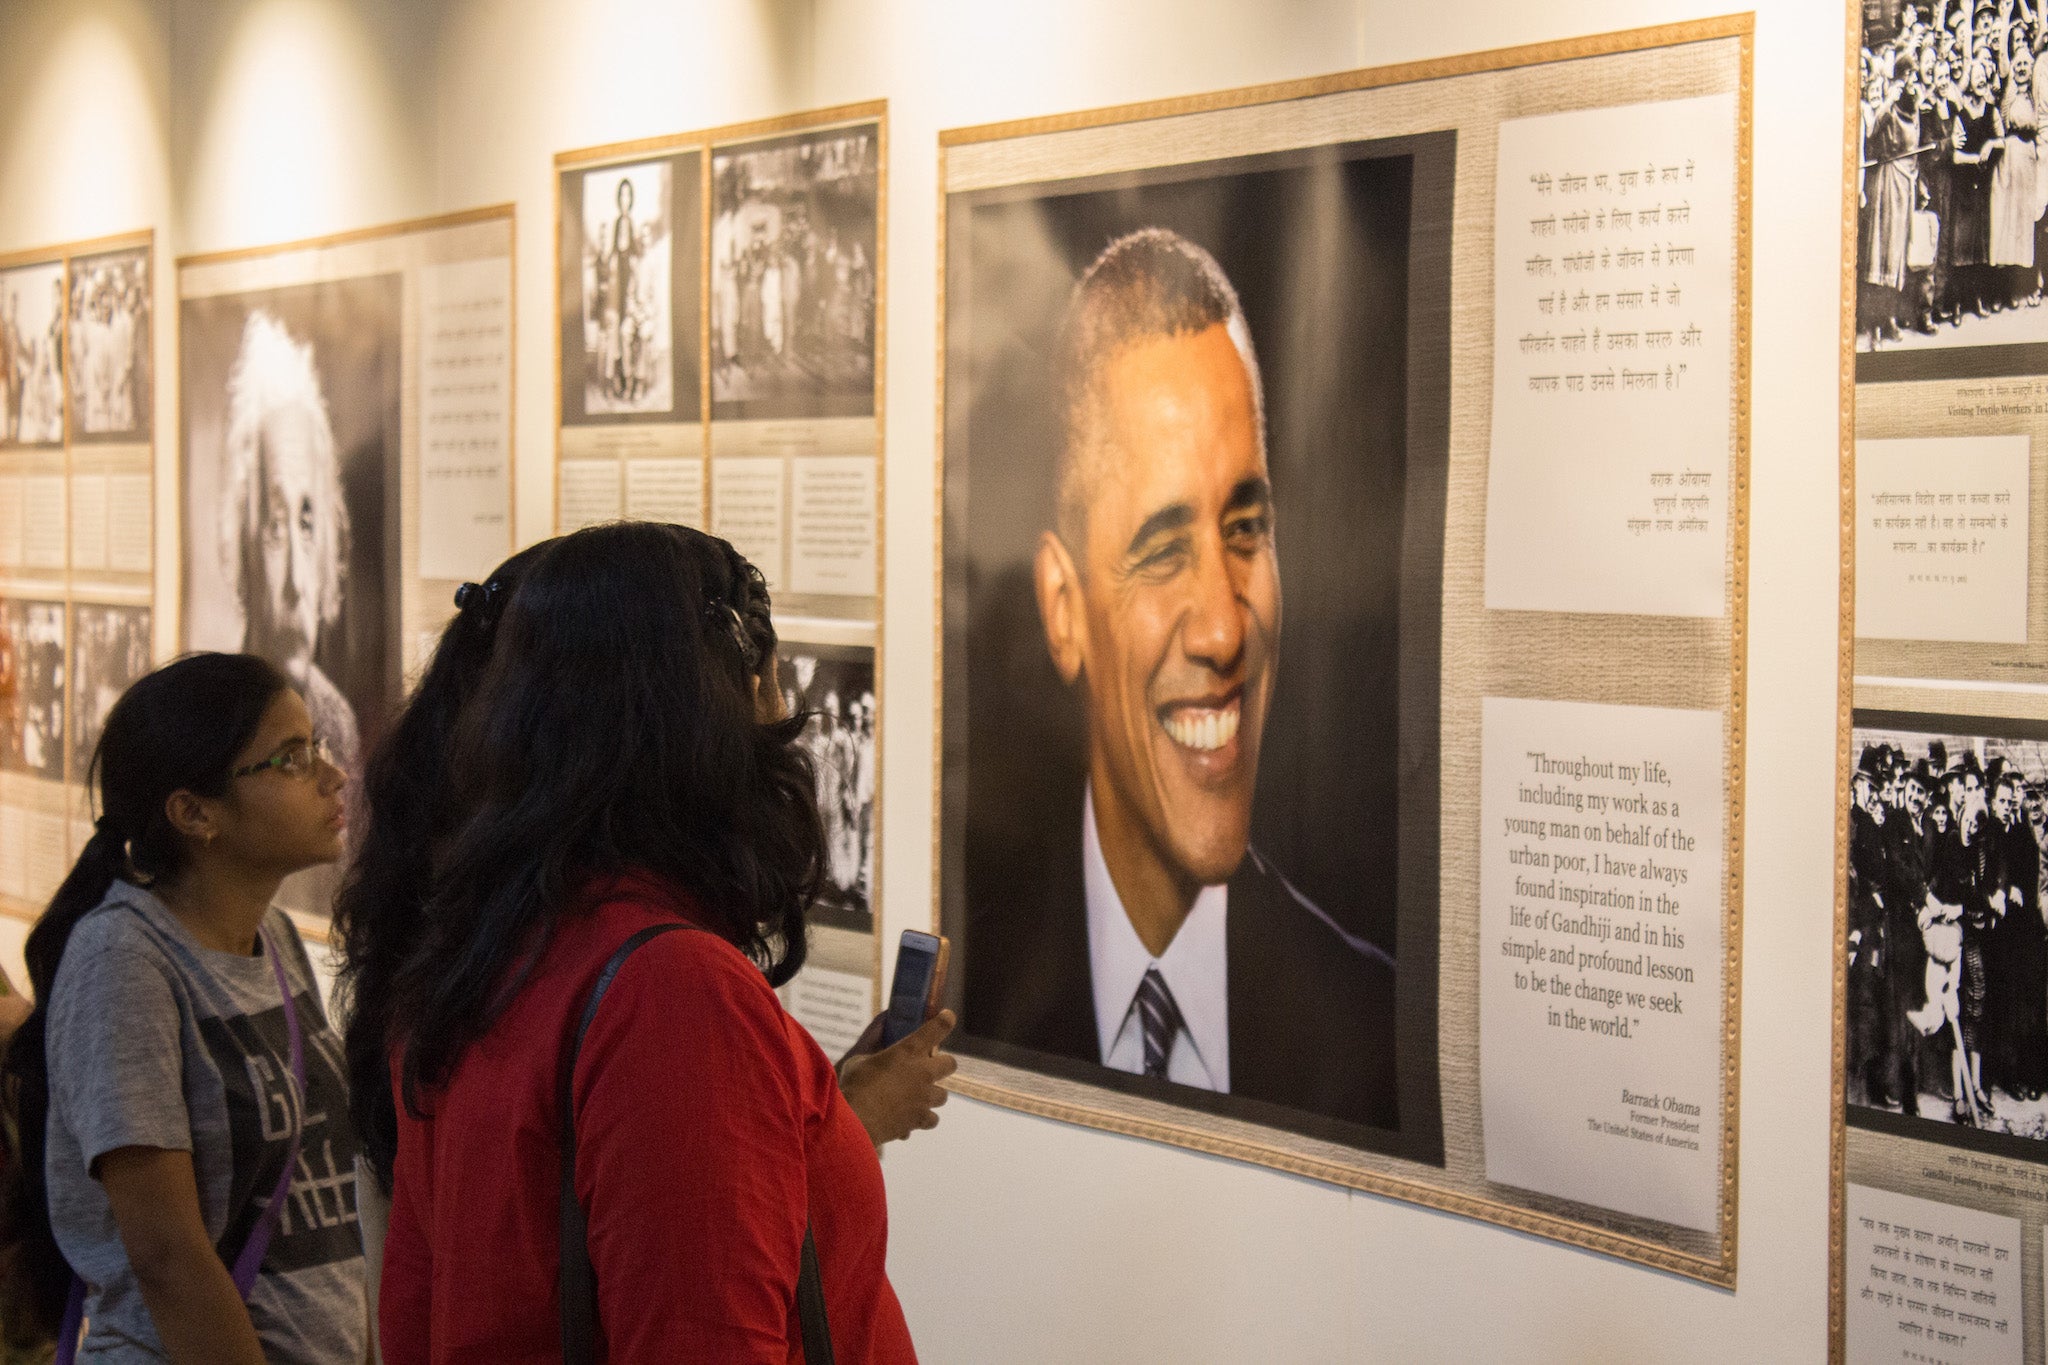 New exhibition asks what influence Gandhi has had on some of the world’s most important leaders